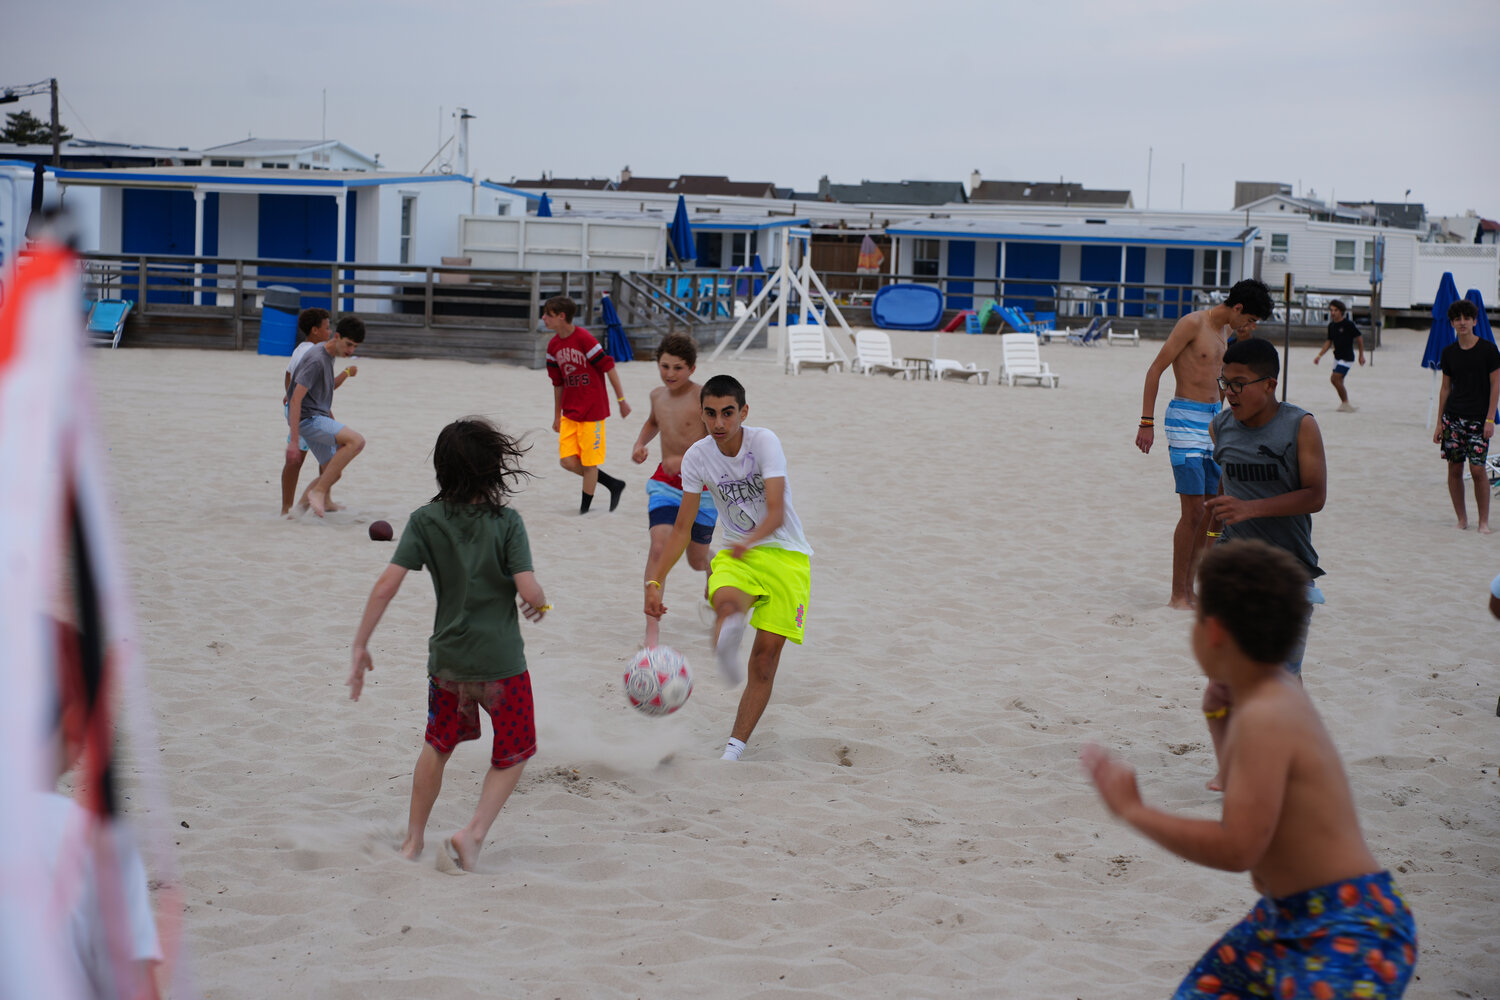 Alan Trakhtenberg kicking the soccer ball during one of the many games on the beach at the Hewlett Lawrence Soccer Club party.